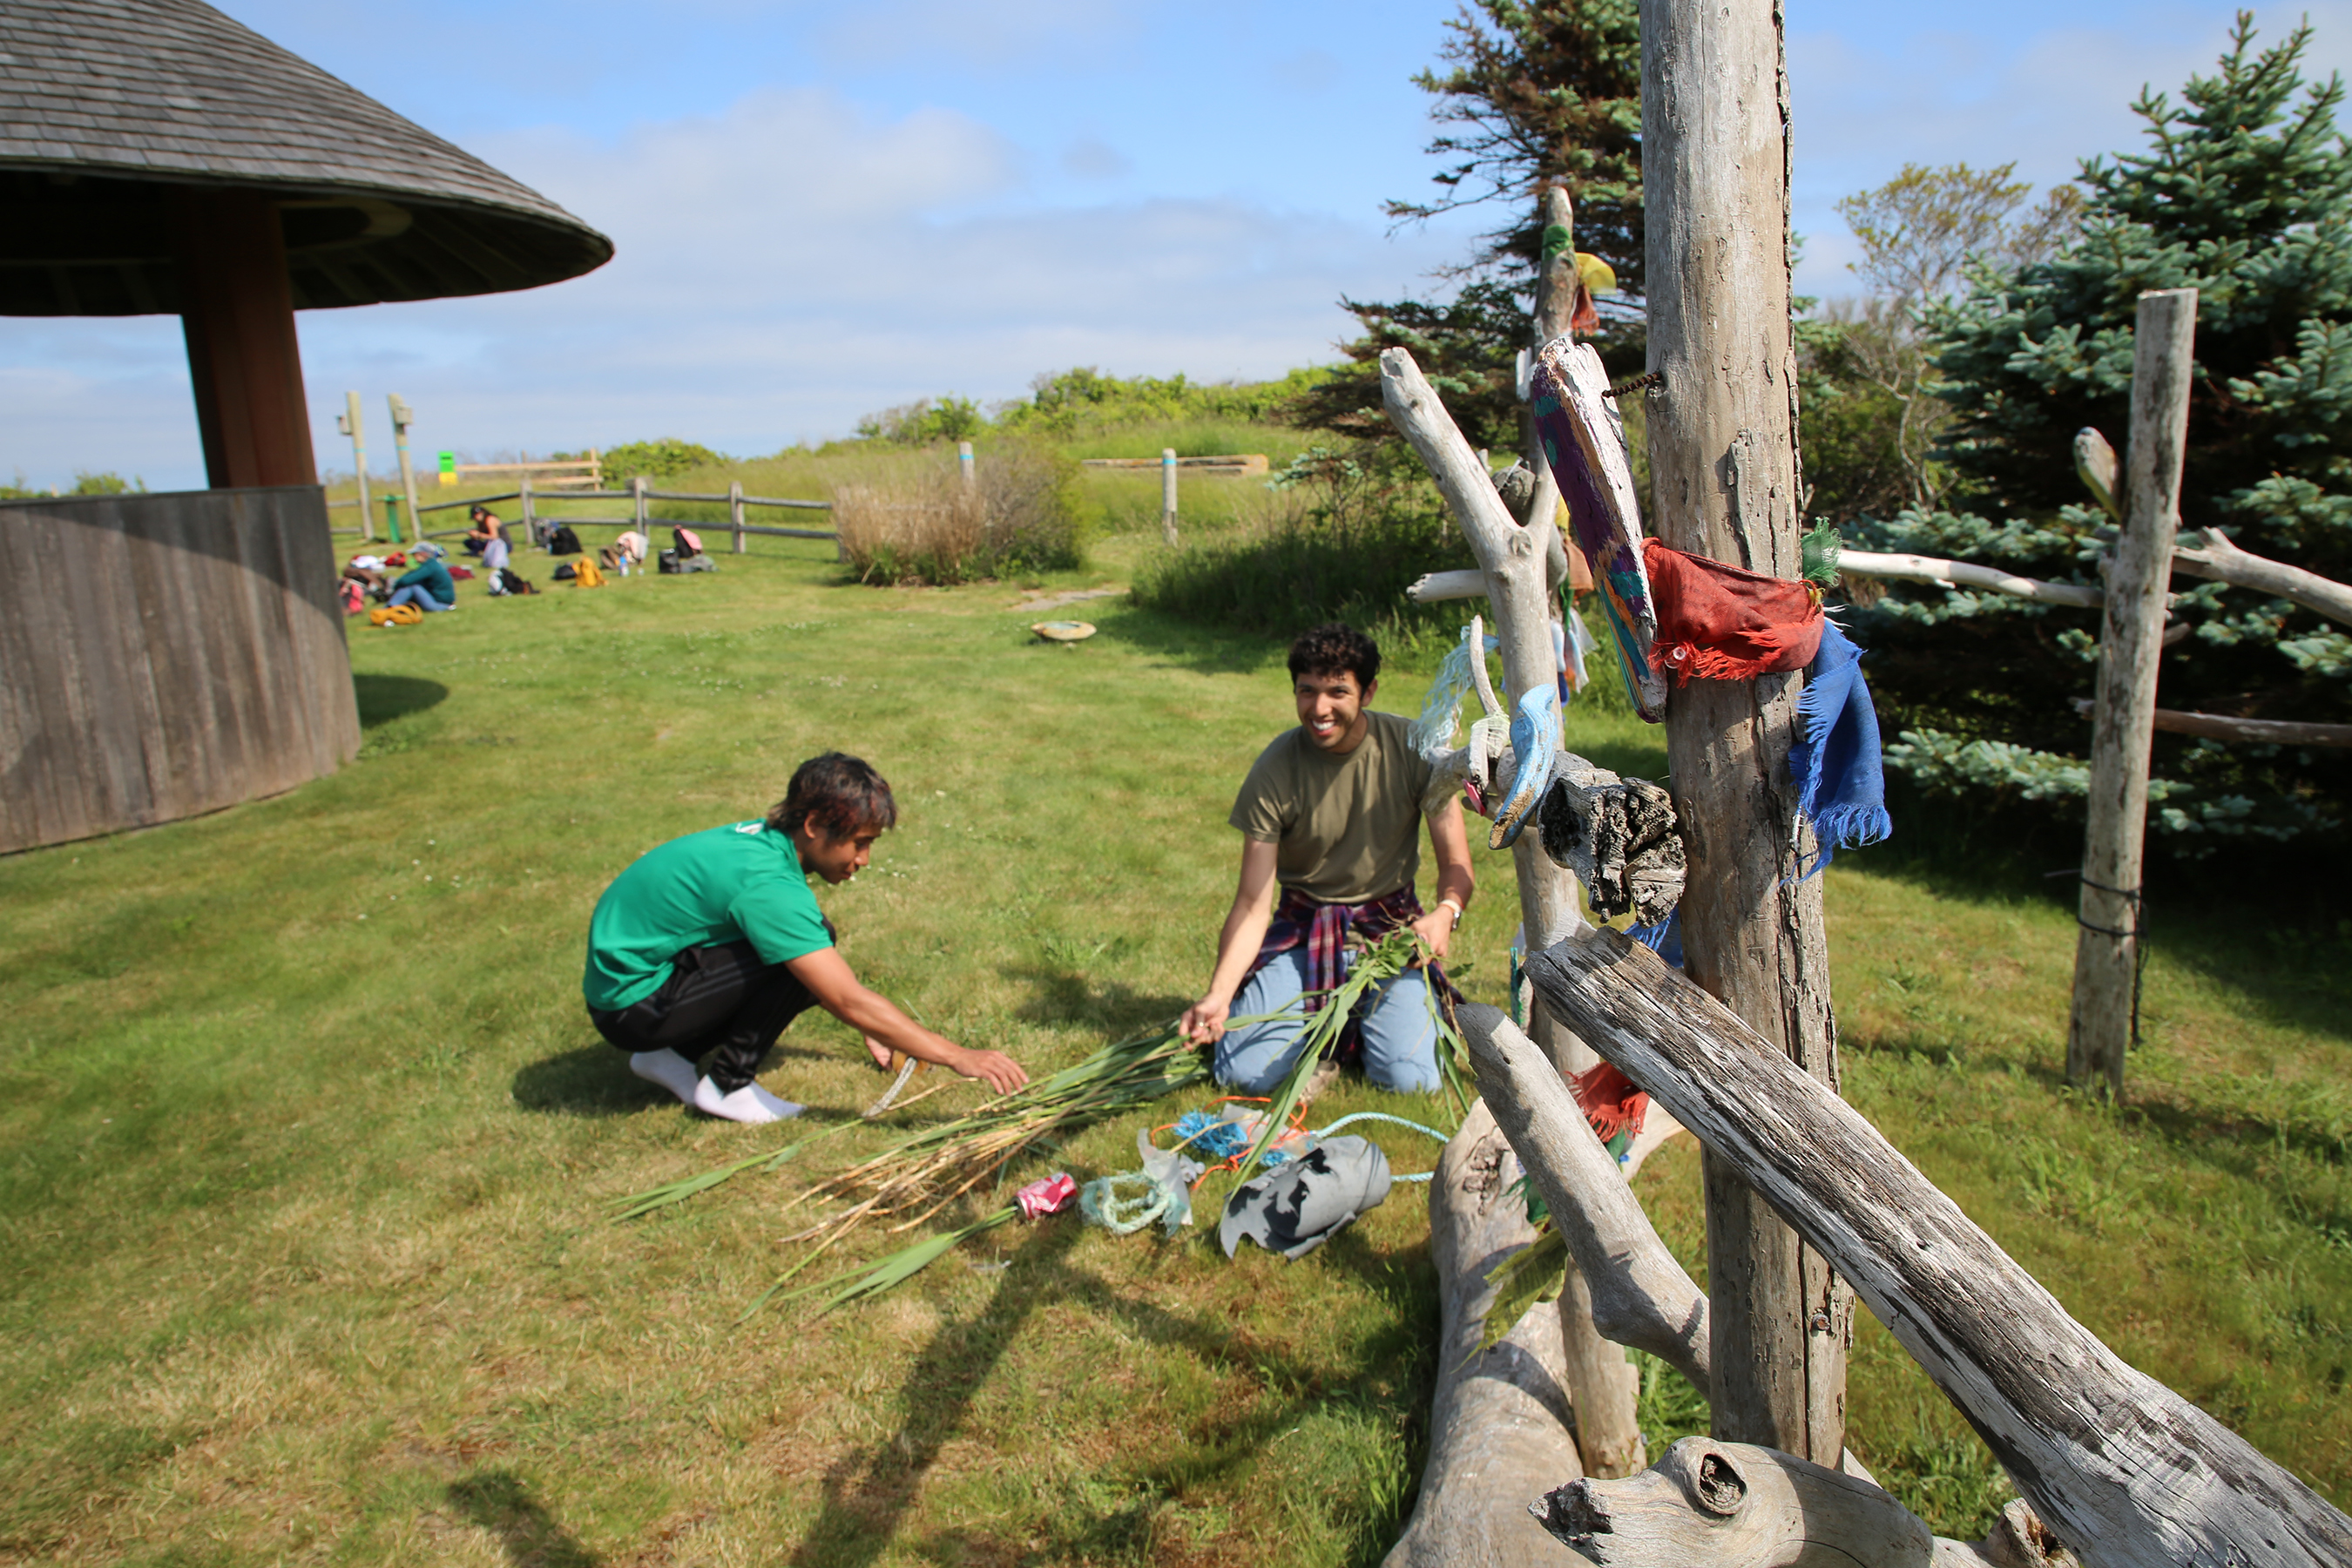 Acts of reciprocity to the people and the land at the Ocean View Pavilion